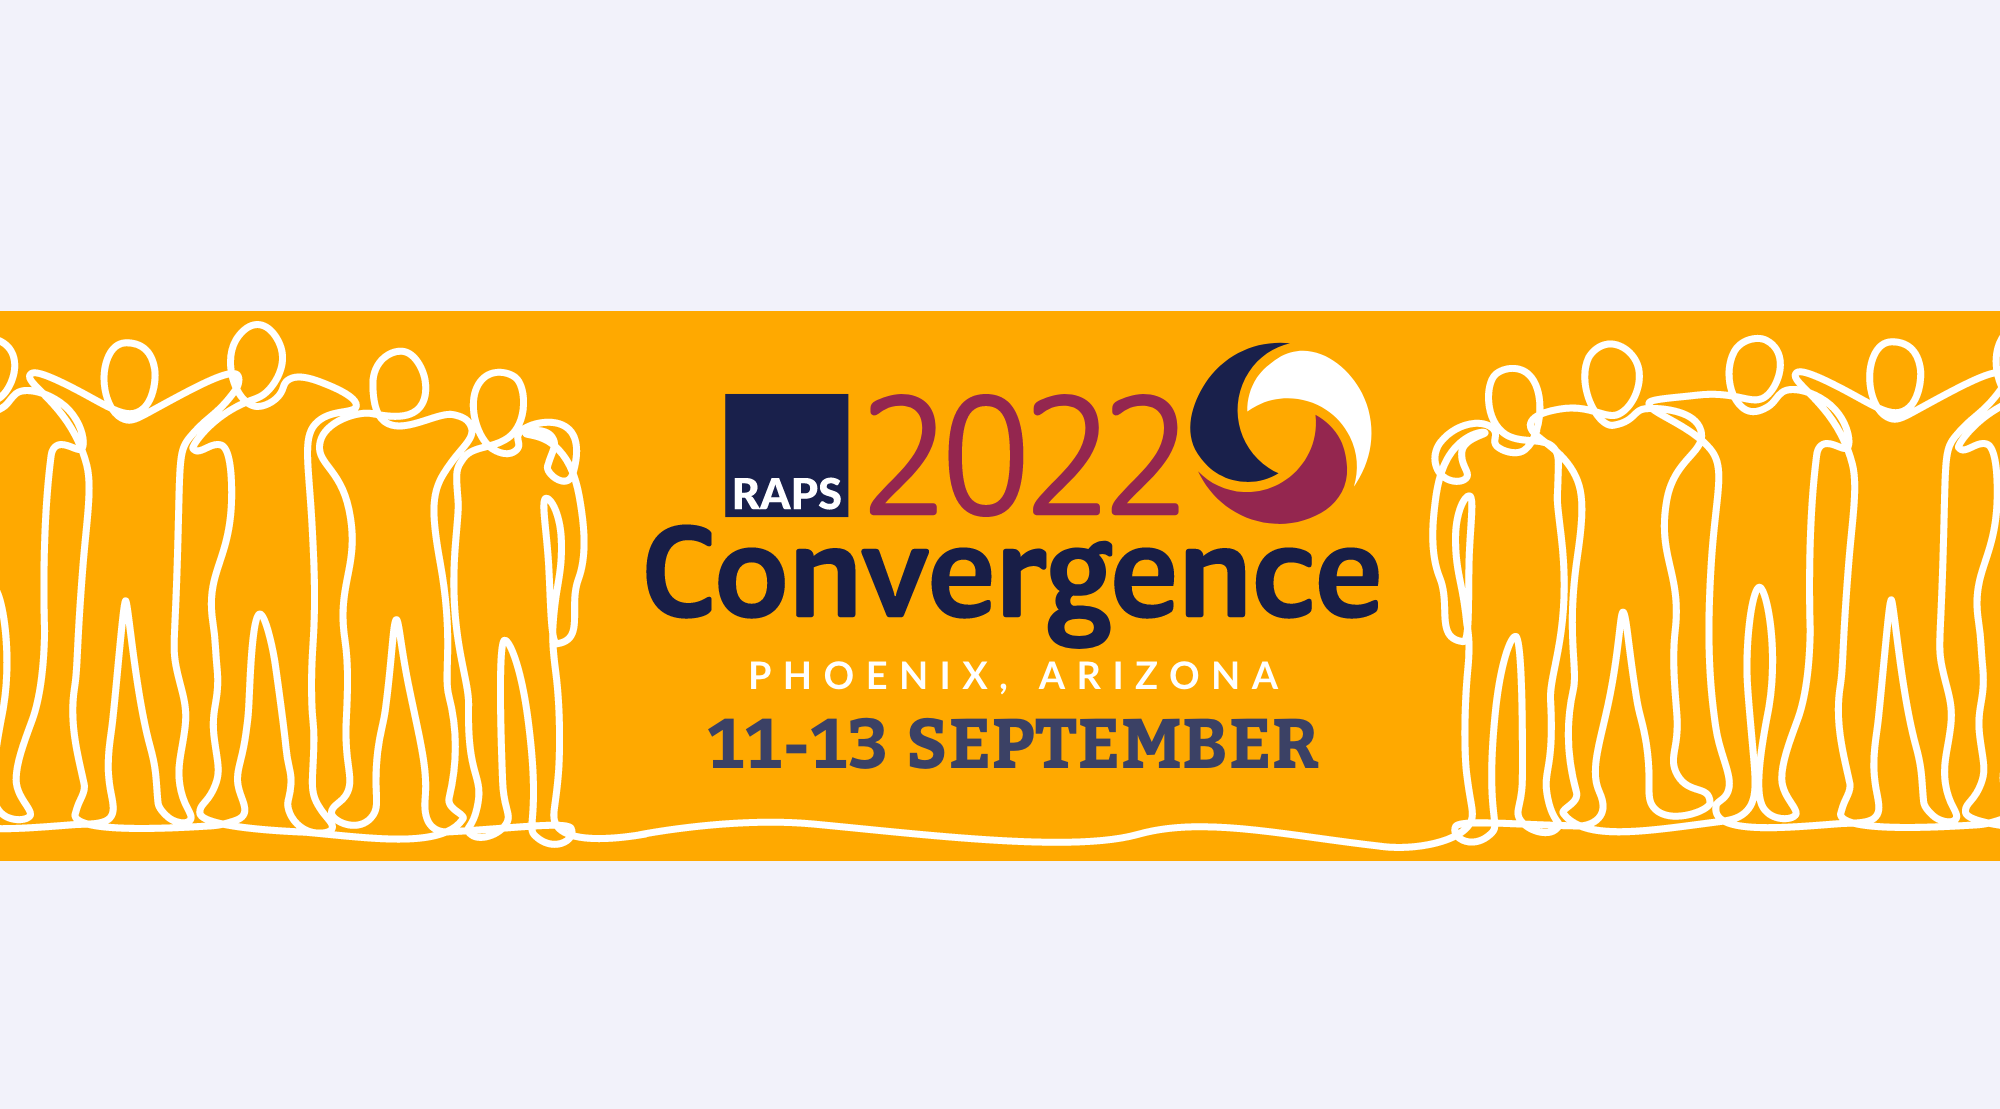 Convergence 2022 Call for Proposals